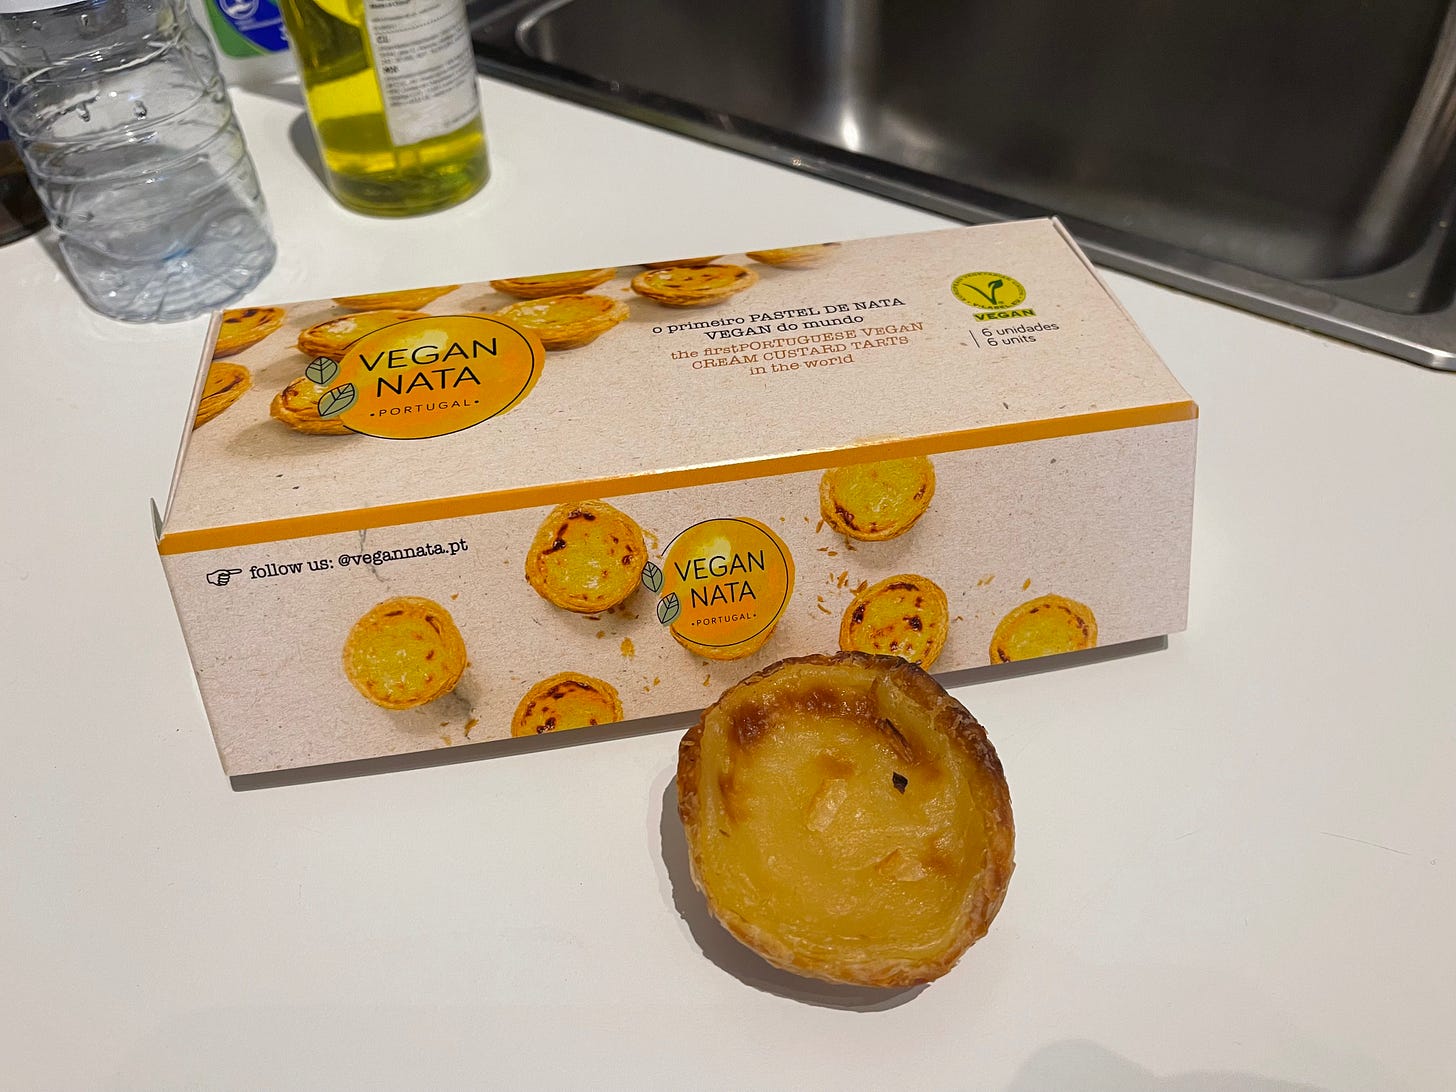 A box of vegan pastéis de nada on a table, one pastel in front of the box